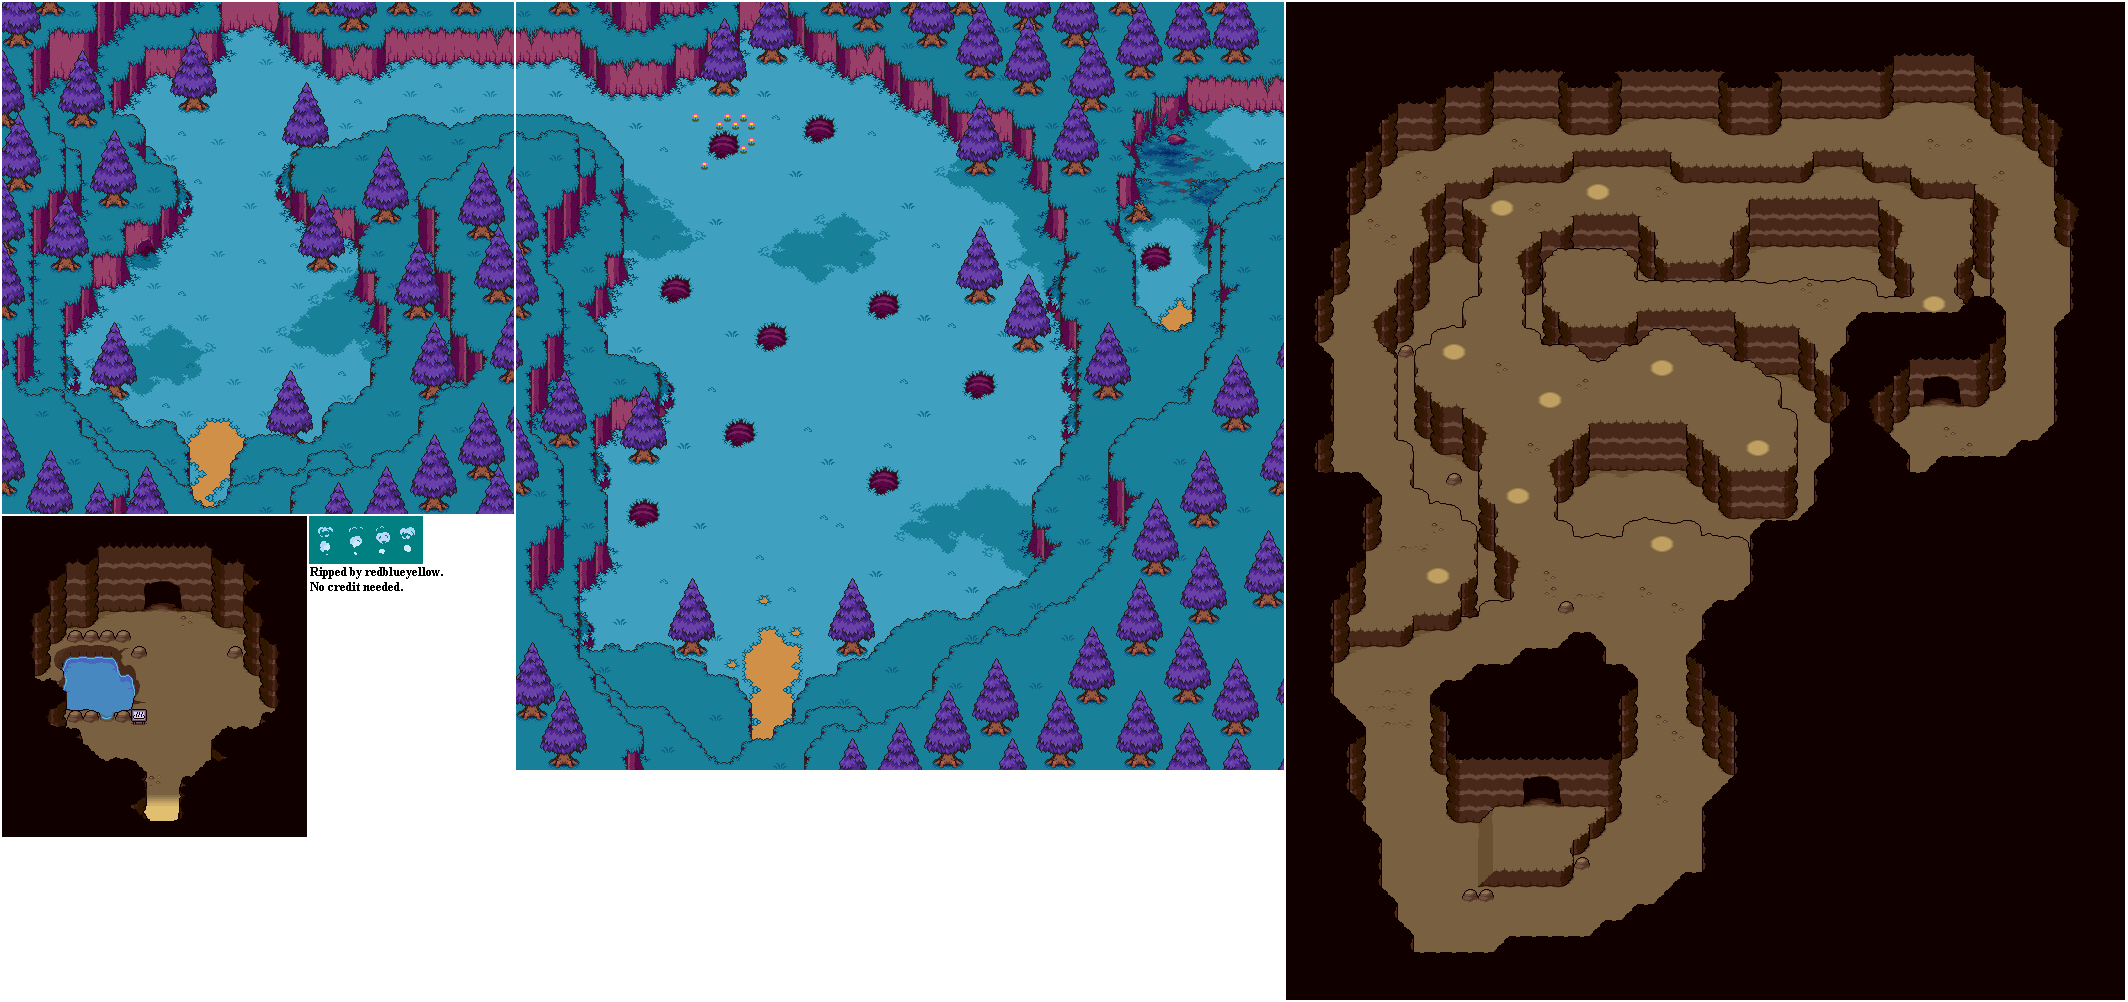 Mother 3 (JPN) - Unknown Valley / Pothole Cavern